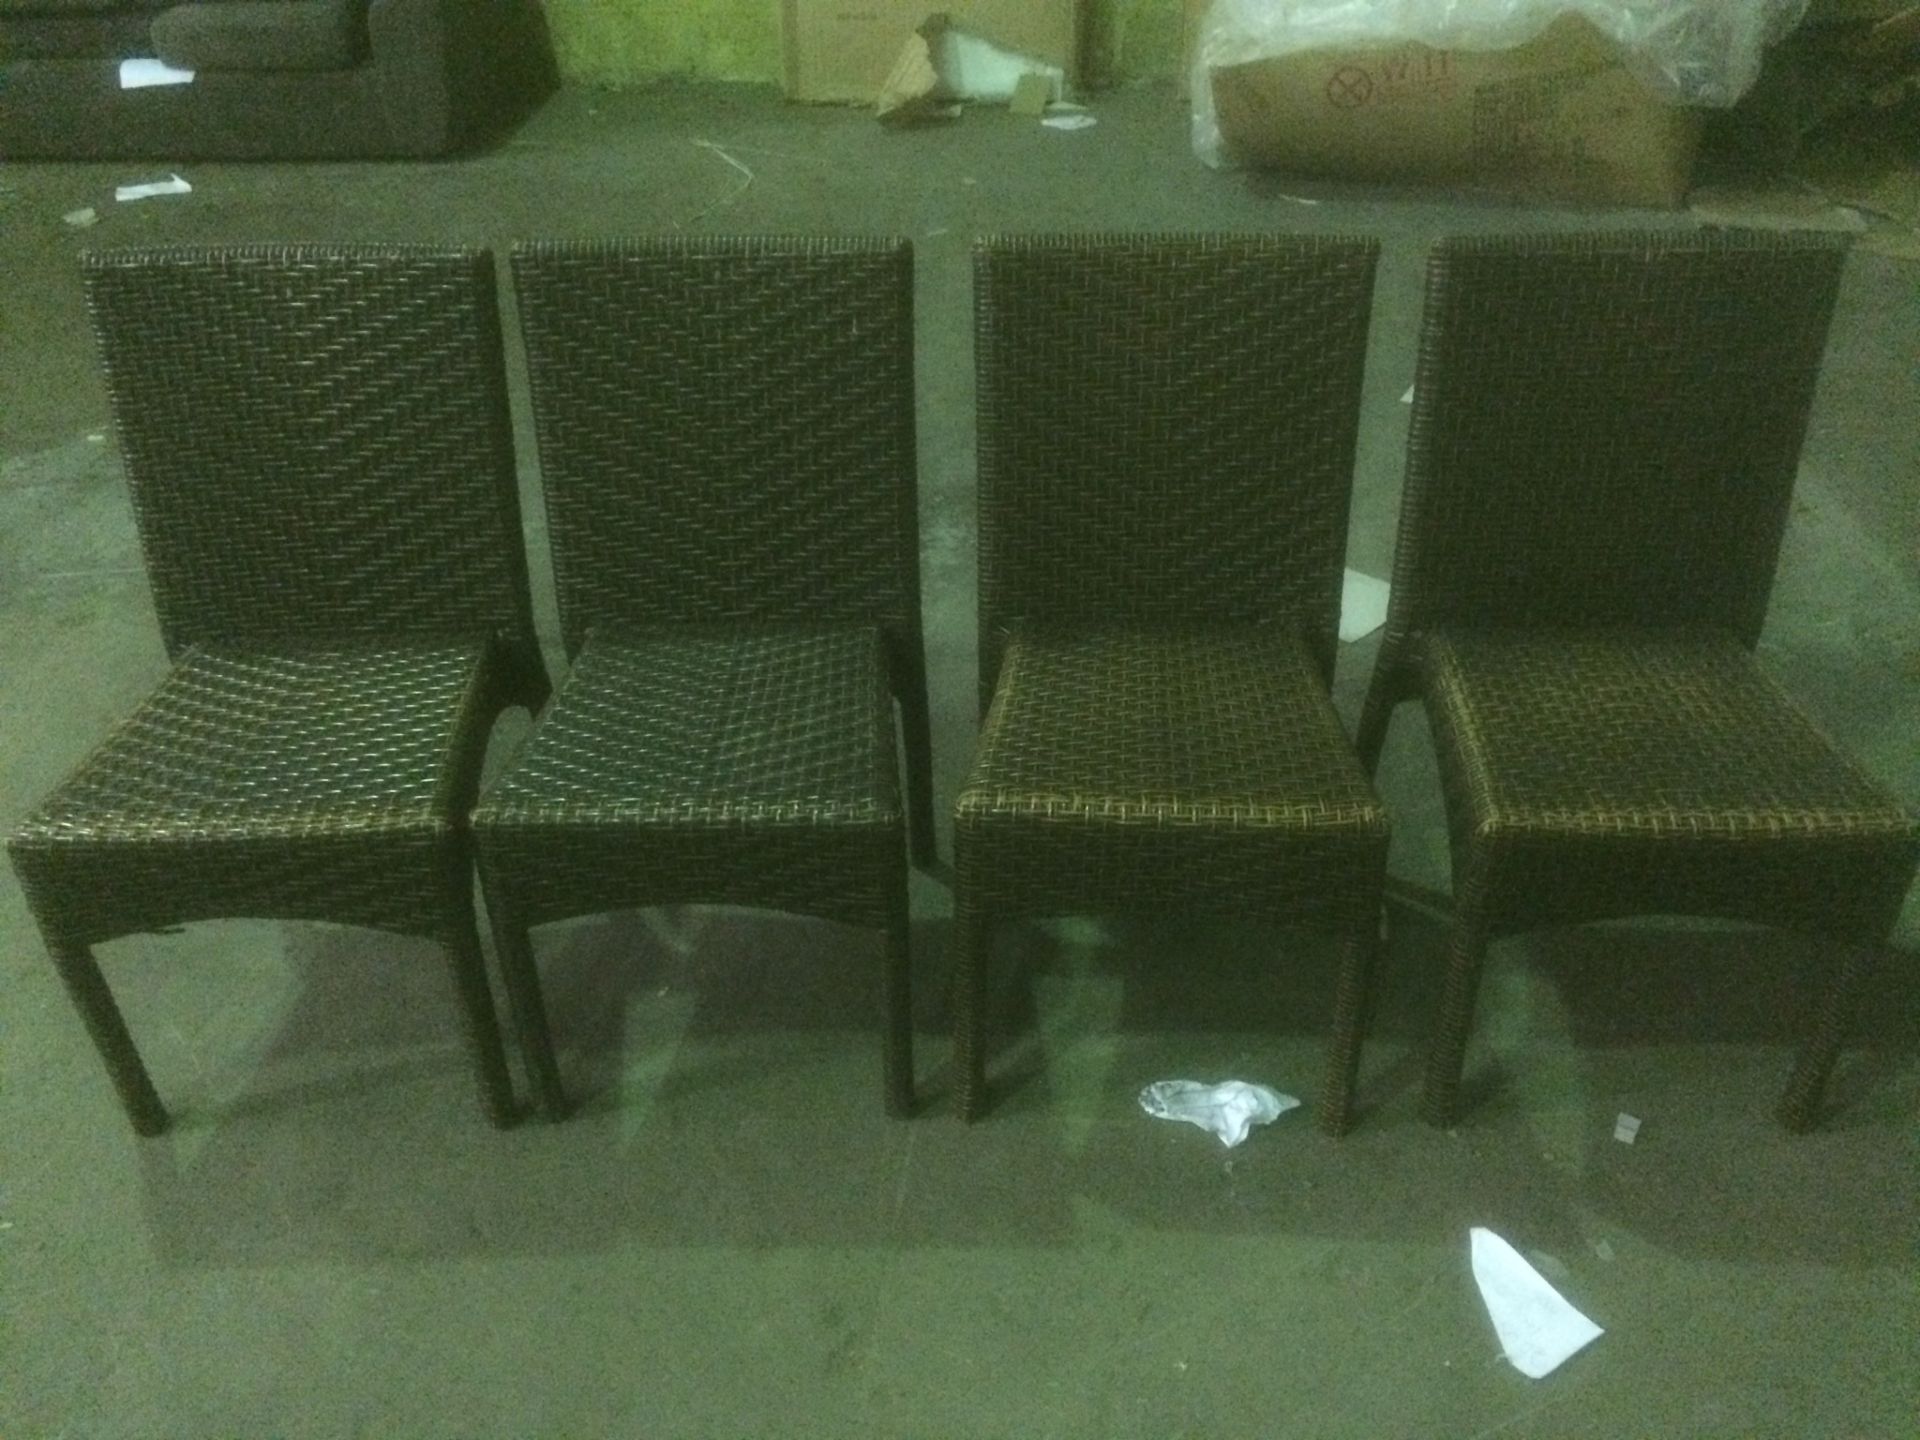 6 x brown woven cane garden chairs - Image 2 of 3